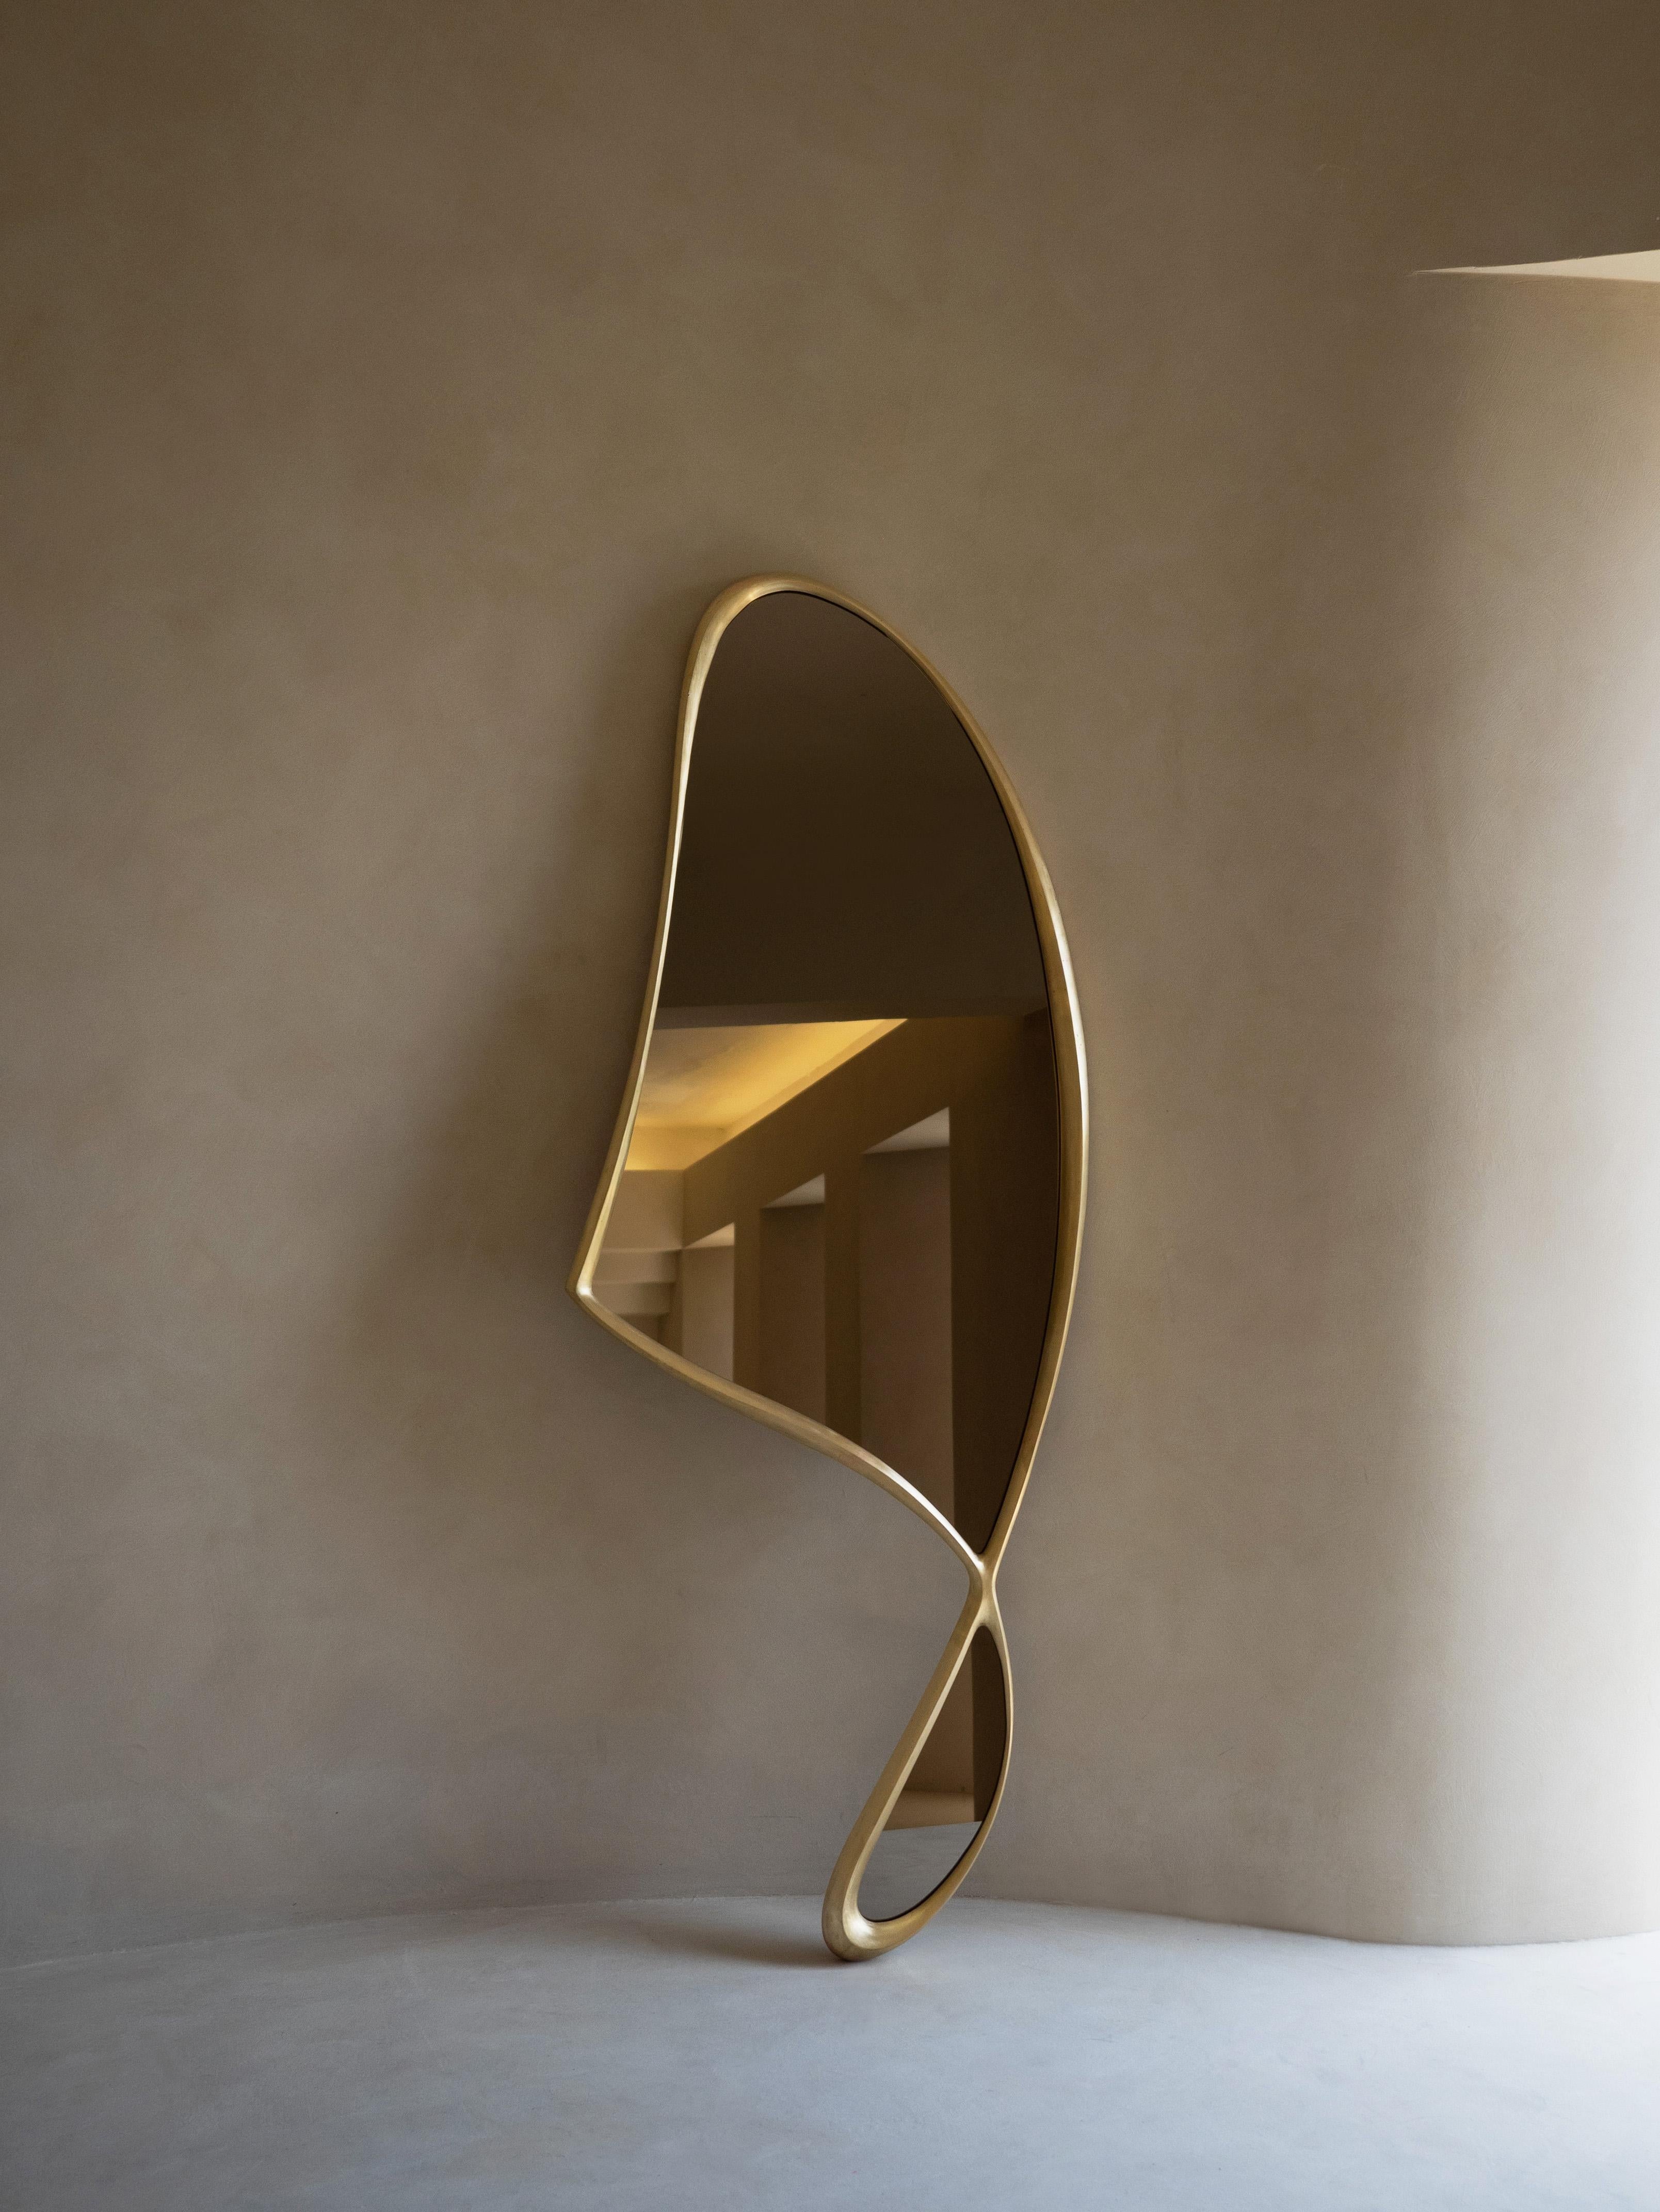 Momentum Mirror II by Soo Joo is a full-body statement mirror in cast bronze. It has a unique and timeless asymmetric form. Its undulating frame is meticulously sculpted in wood with a rasp tool, before being cast in metal. Its timeless form has an